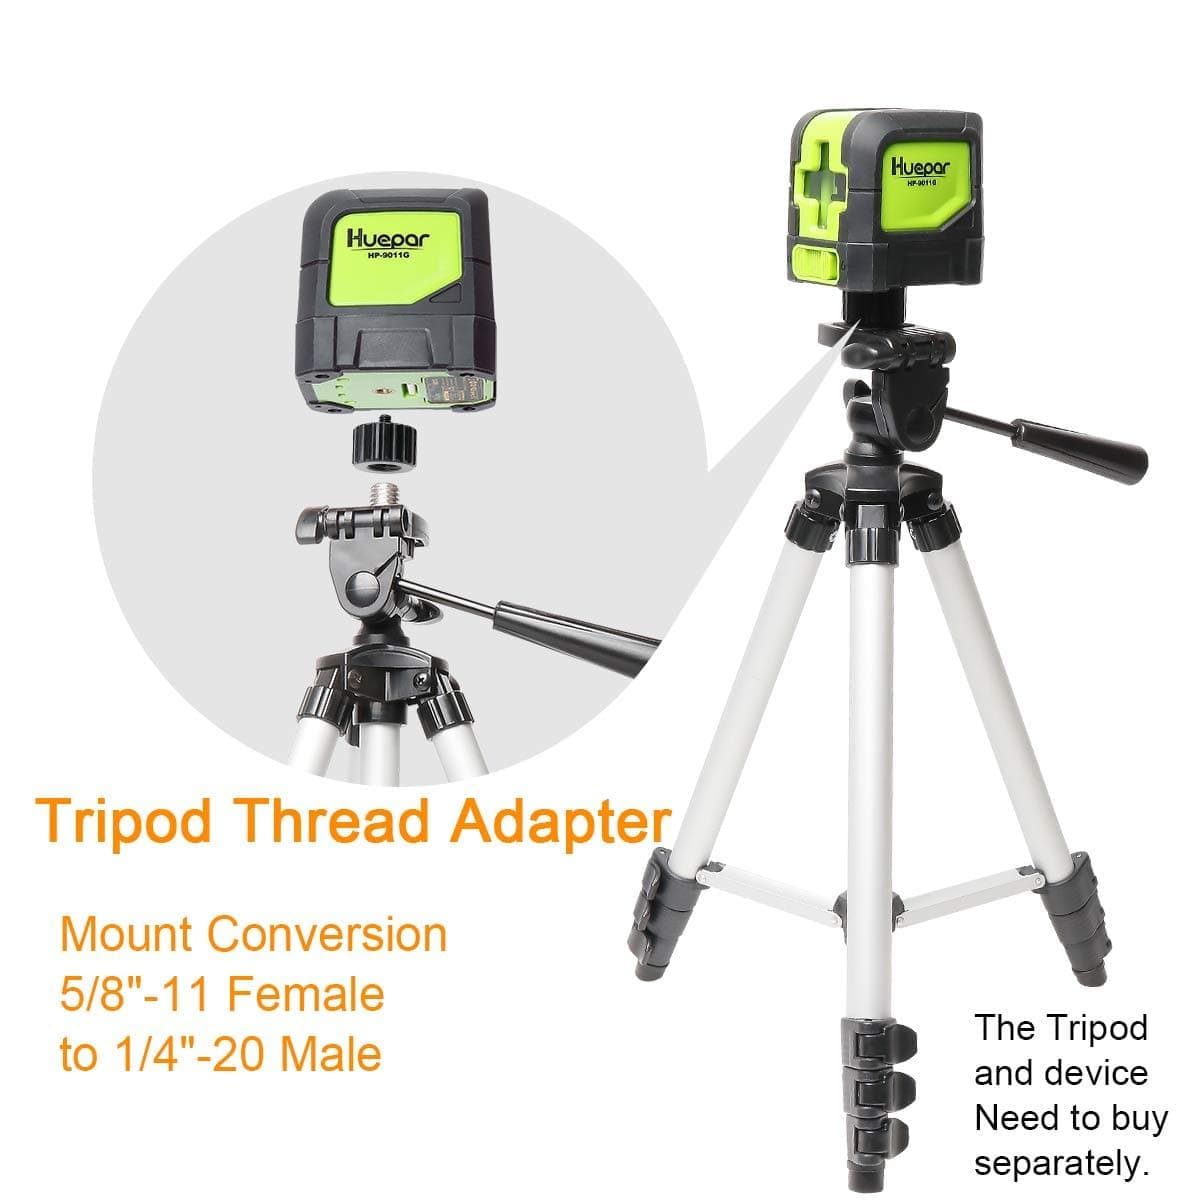 HUEPAR Adapter with 5/8-inch to 11 Female to 1/4-inch to 20 Male thread conversion for tripods and lasers, free shipping in the US4